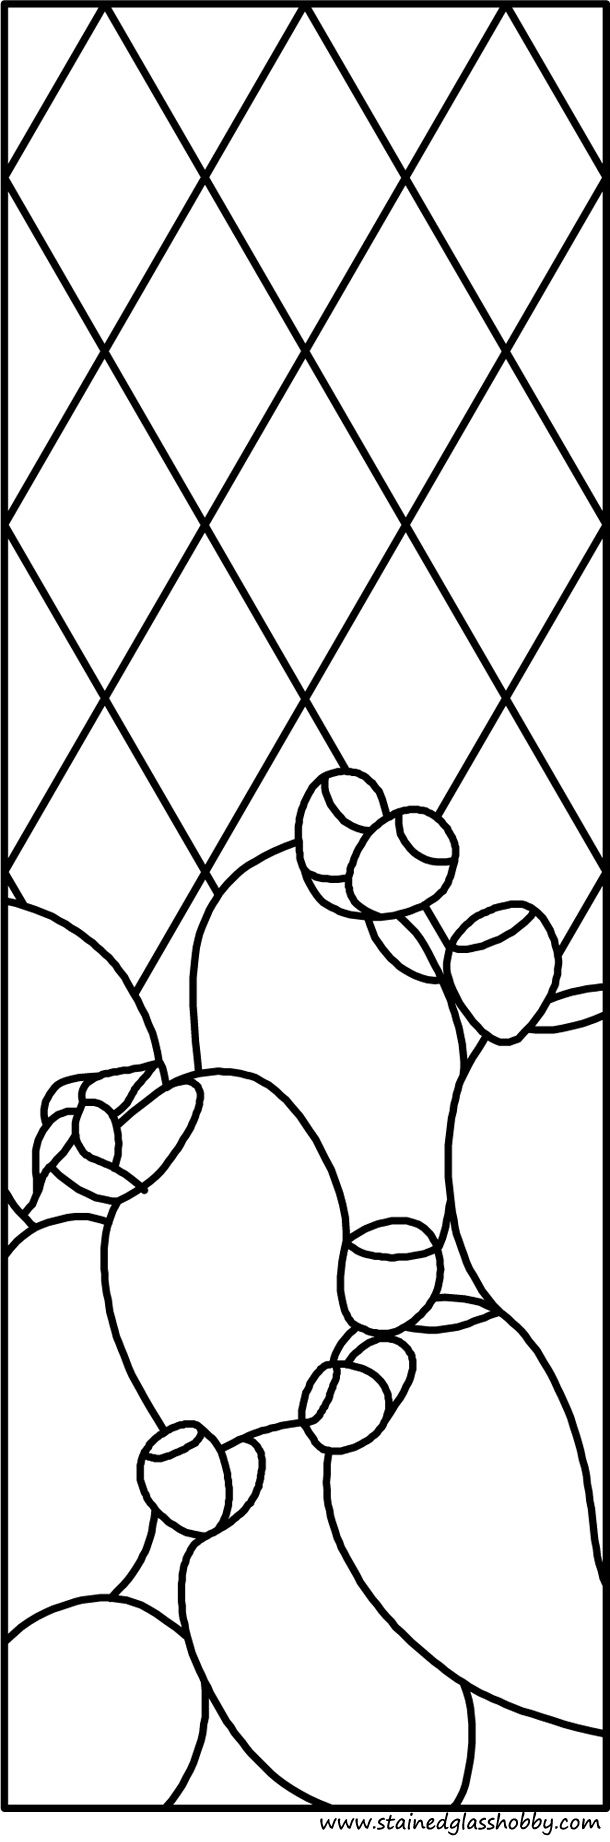 Bajtra panel stained glass pattern